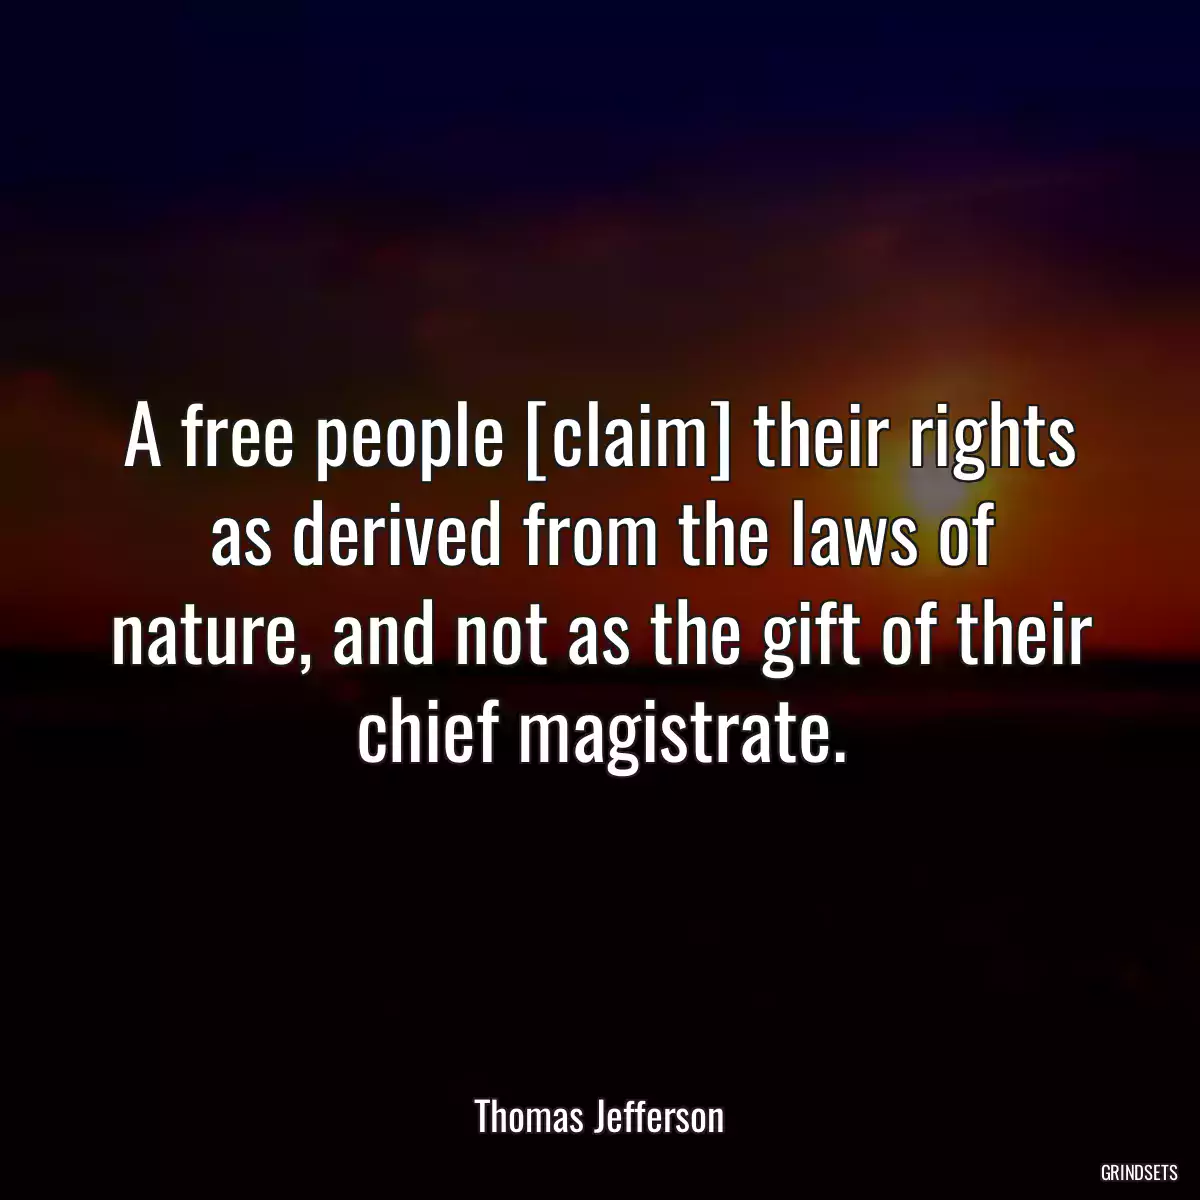 A free people [claim] their rights as derived from the laws of nature, and not as the gift of their chief magistrate.